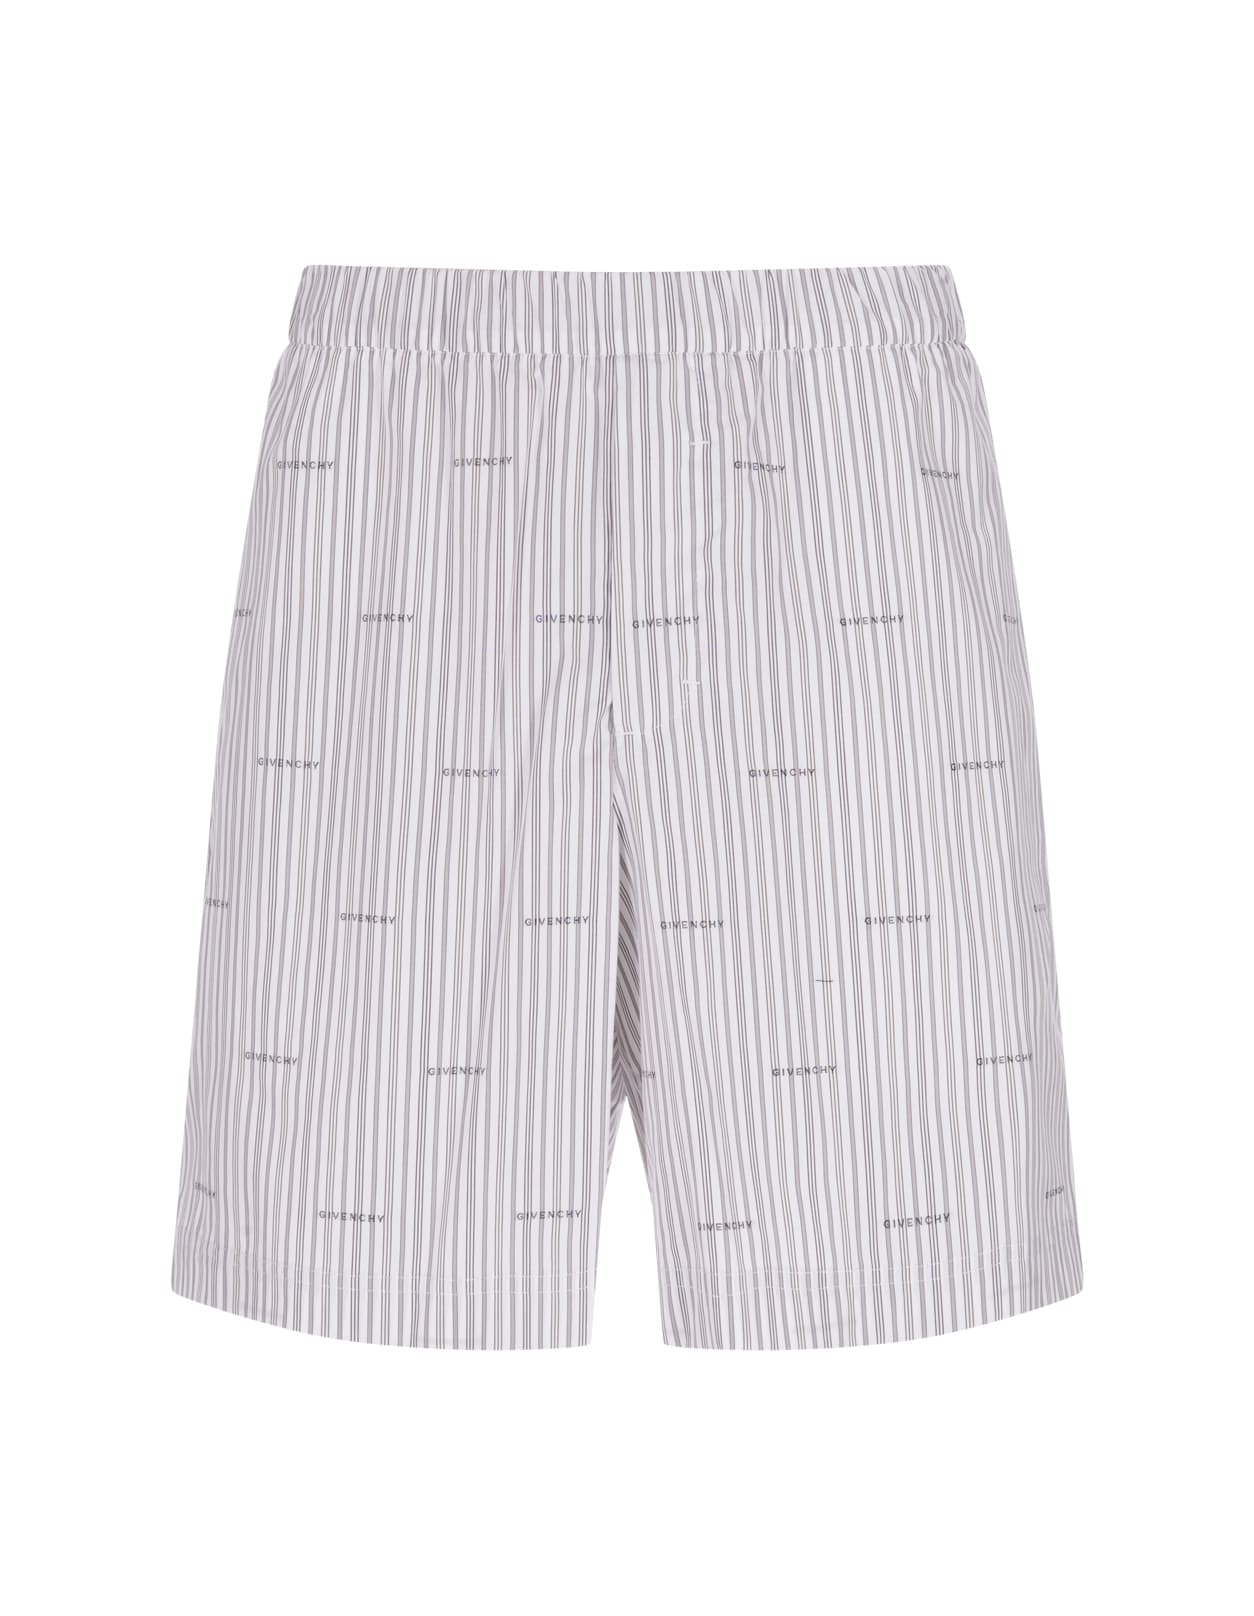 GIVENCHY STRIPED COTTON SHORTS